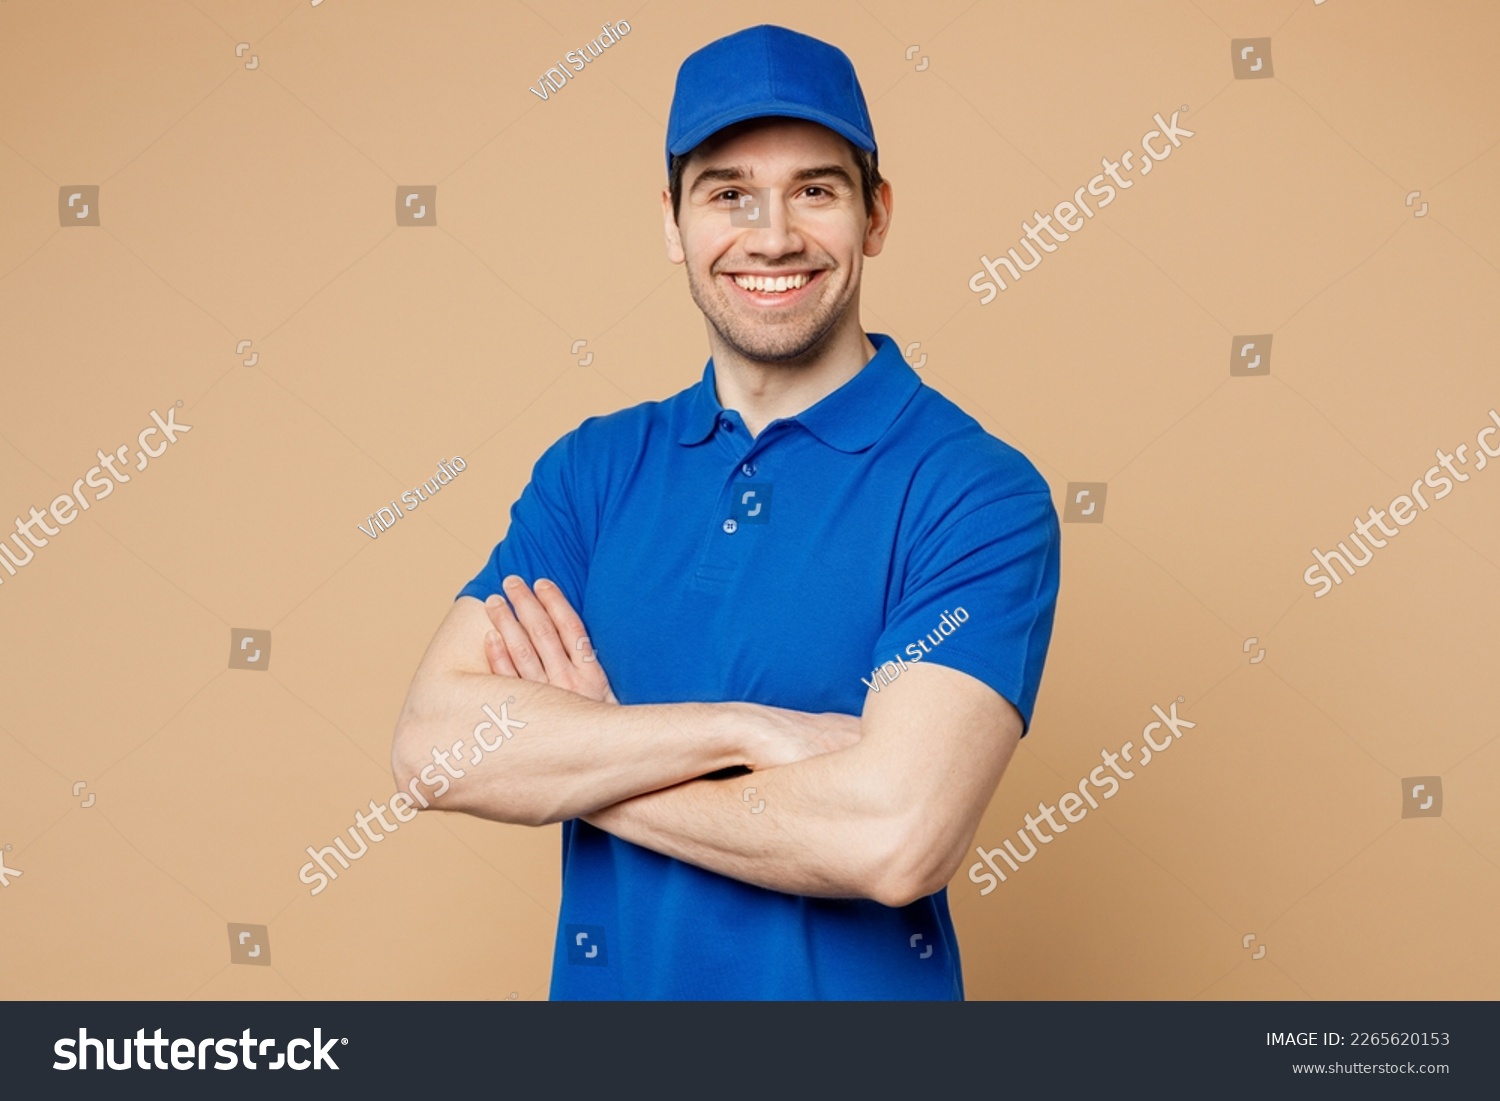 Professional delivery guy employee man wears blue cap t-shirt uniform workwear work as dealer courier look camera hold hands crossed folded isolated on plain light beige background. Service concept #2265620153